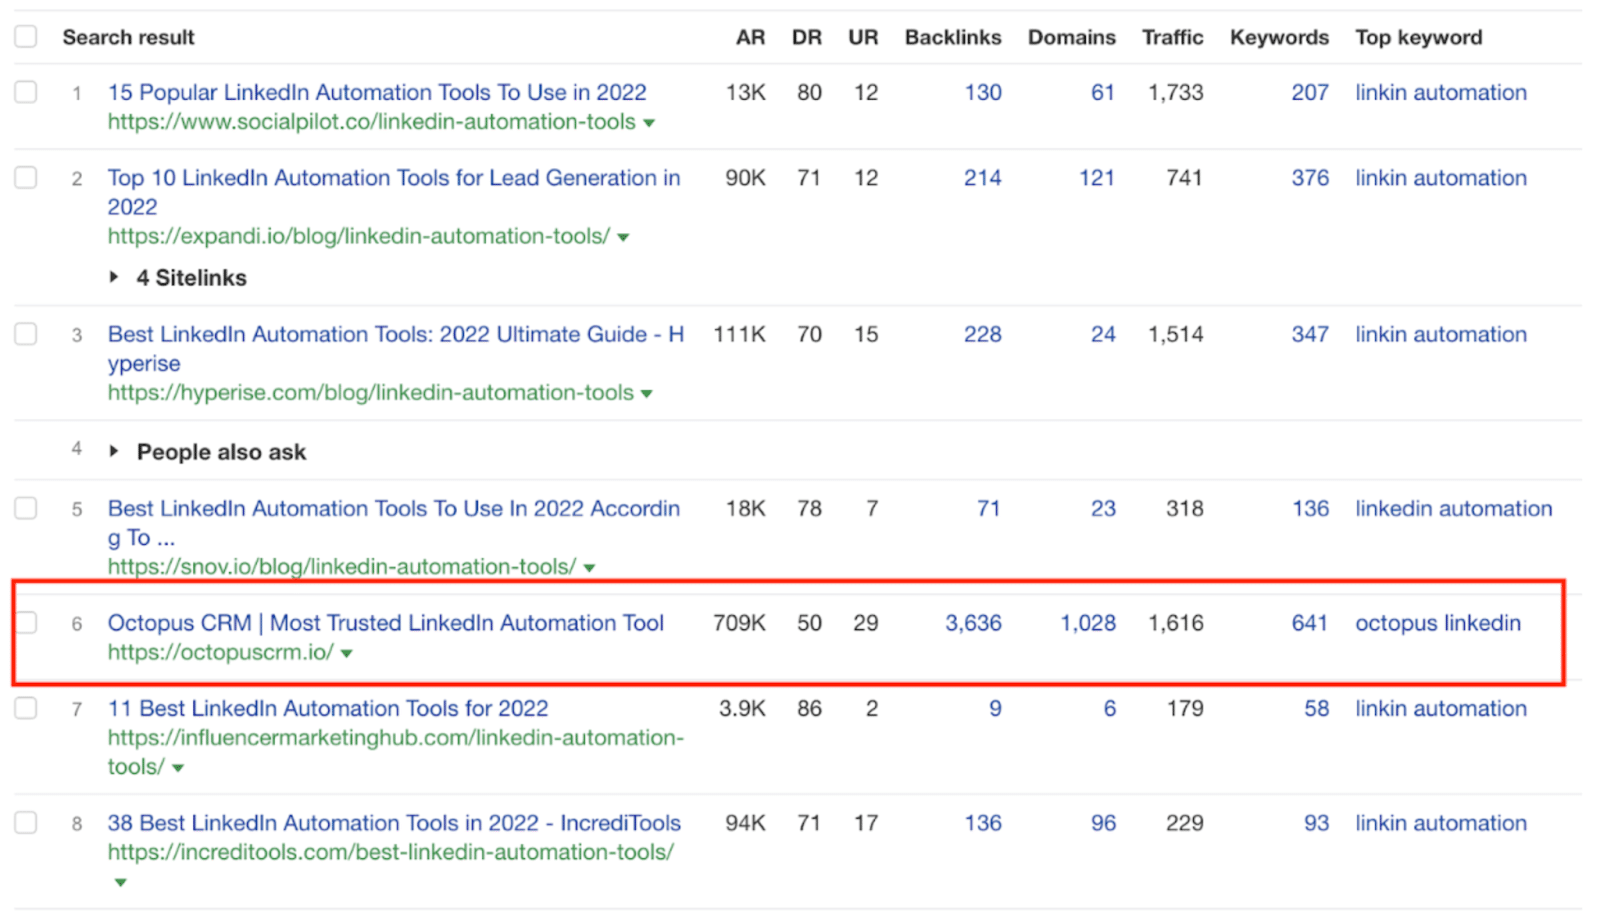 Search results for SaaS keyword: Linkedin Automation Tool